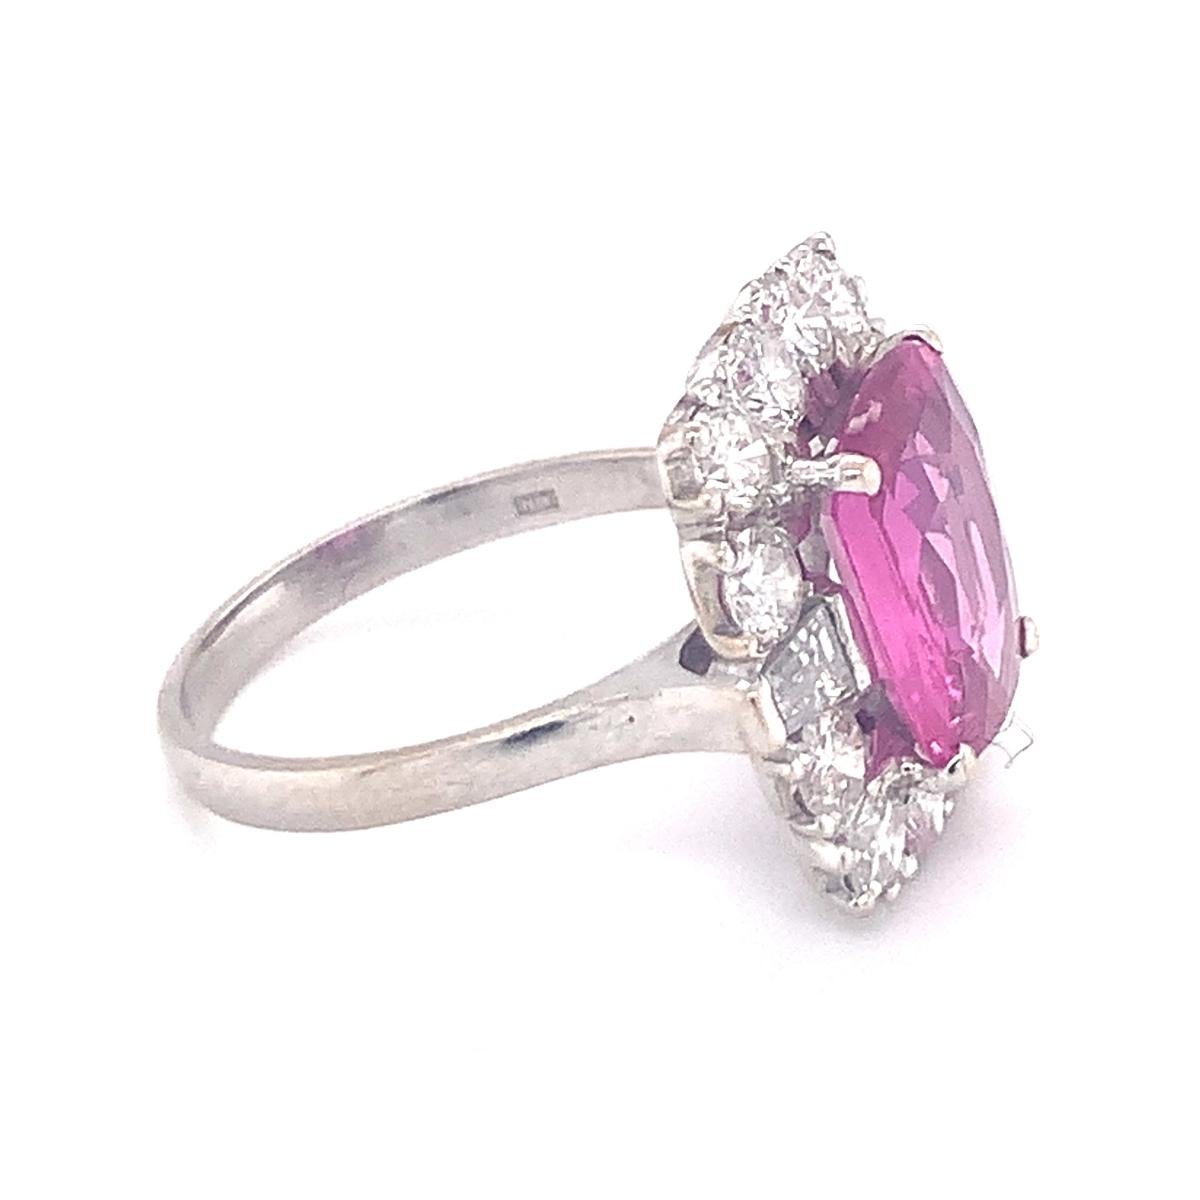 Gia Certified 4.10 Ct. Pink Sapphire and Diamond White Gold Ring, circa 1950s For Sale 2